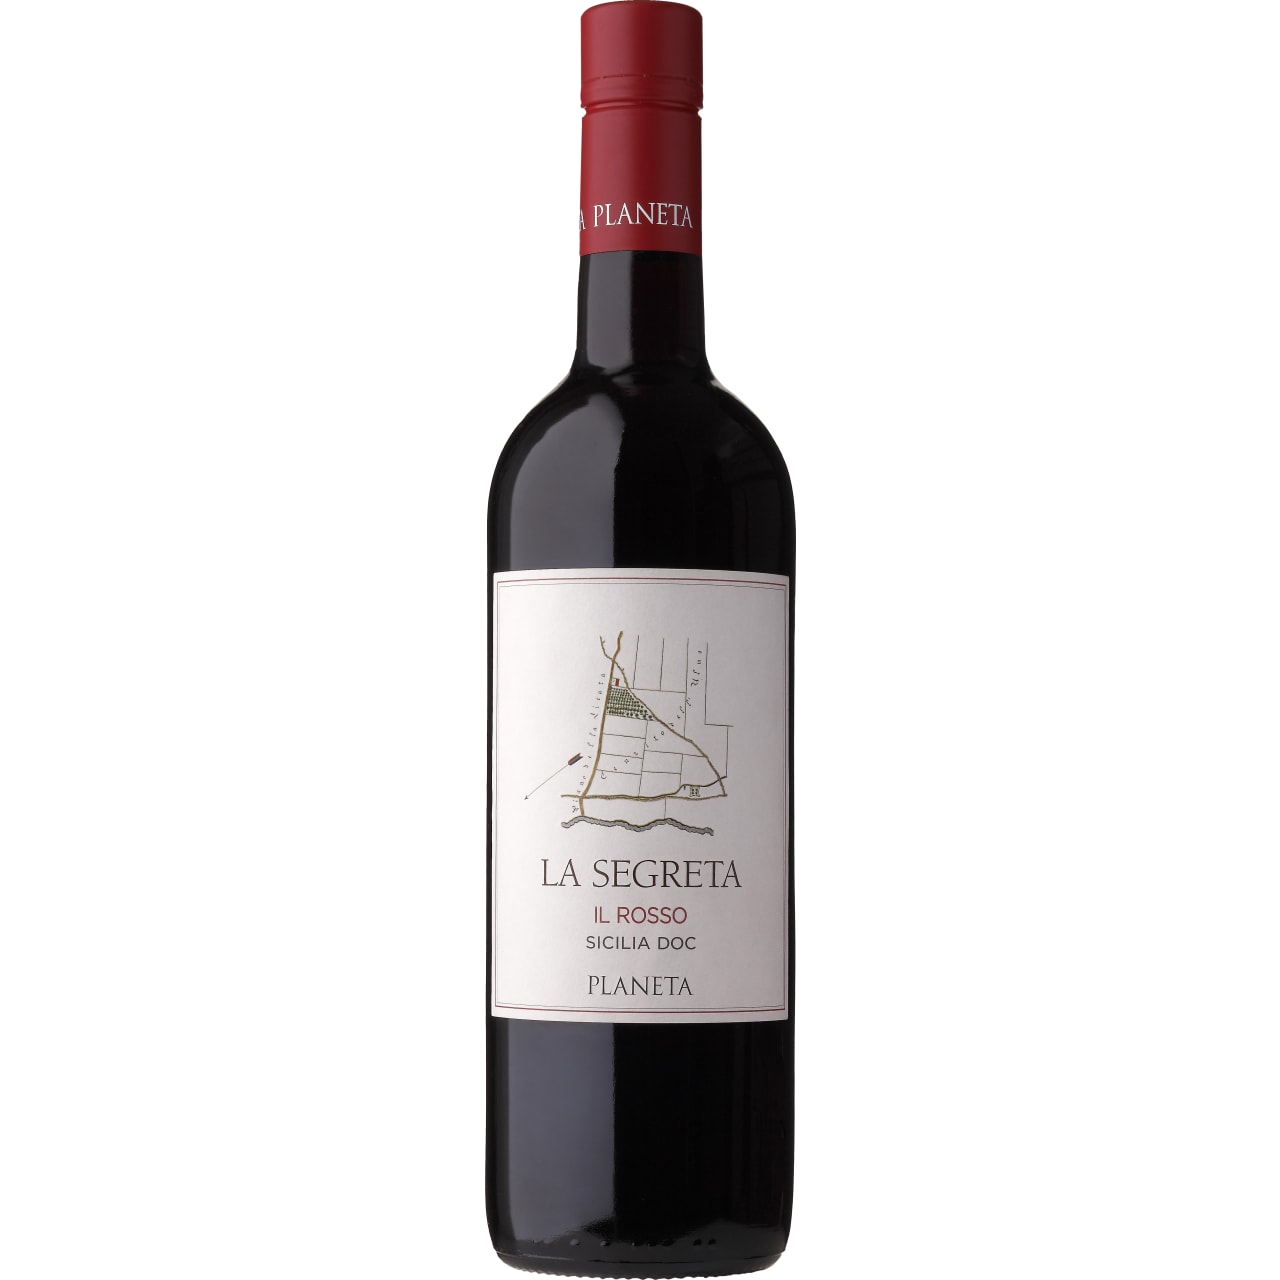 An elegant mouthful of crunchily textured, ripe berry fruit, redcurrants and spices.